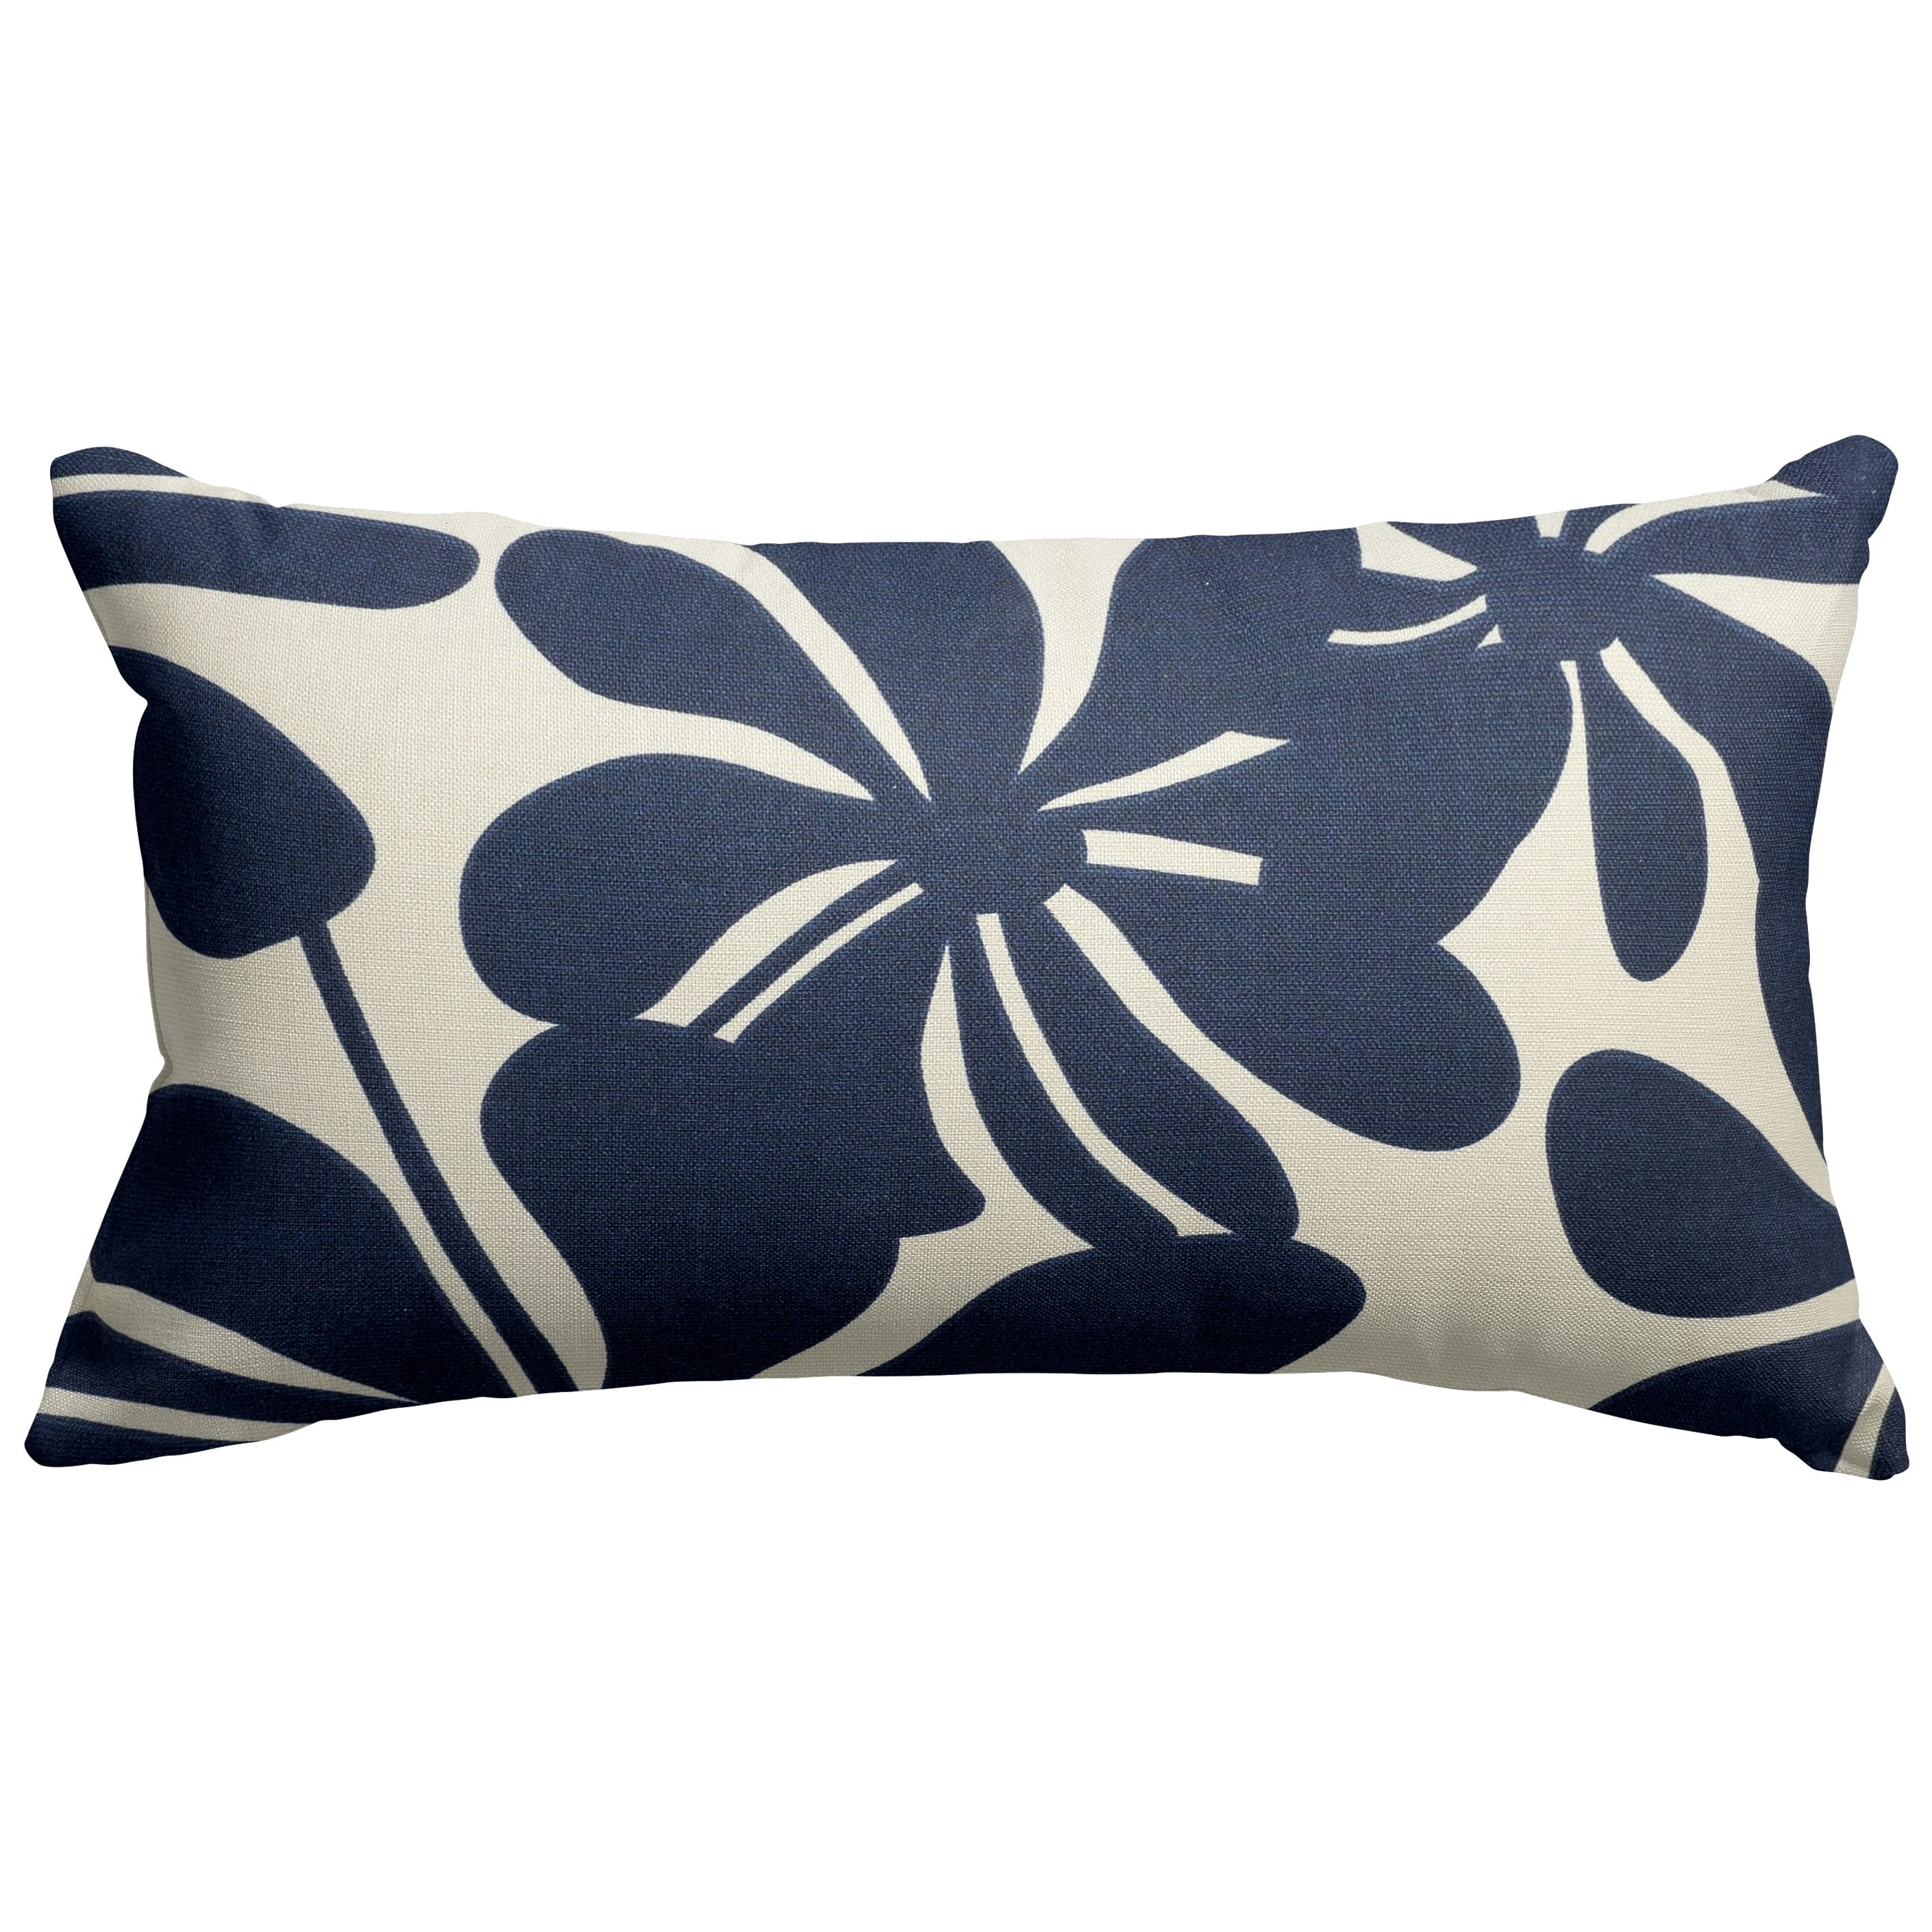 https://ak1.ostkcdn.com/images/products/22277155/Majestic-Home-Goods-Indoor-Outdoor-Plantation-Small-Decorative-Throw-Pillow-20-X-12-273f615d-c3cb-4b71-becf-4be547cbe66c.jpg